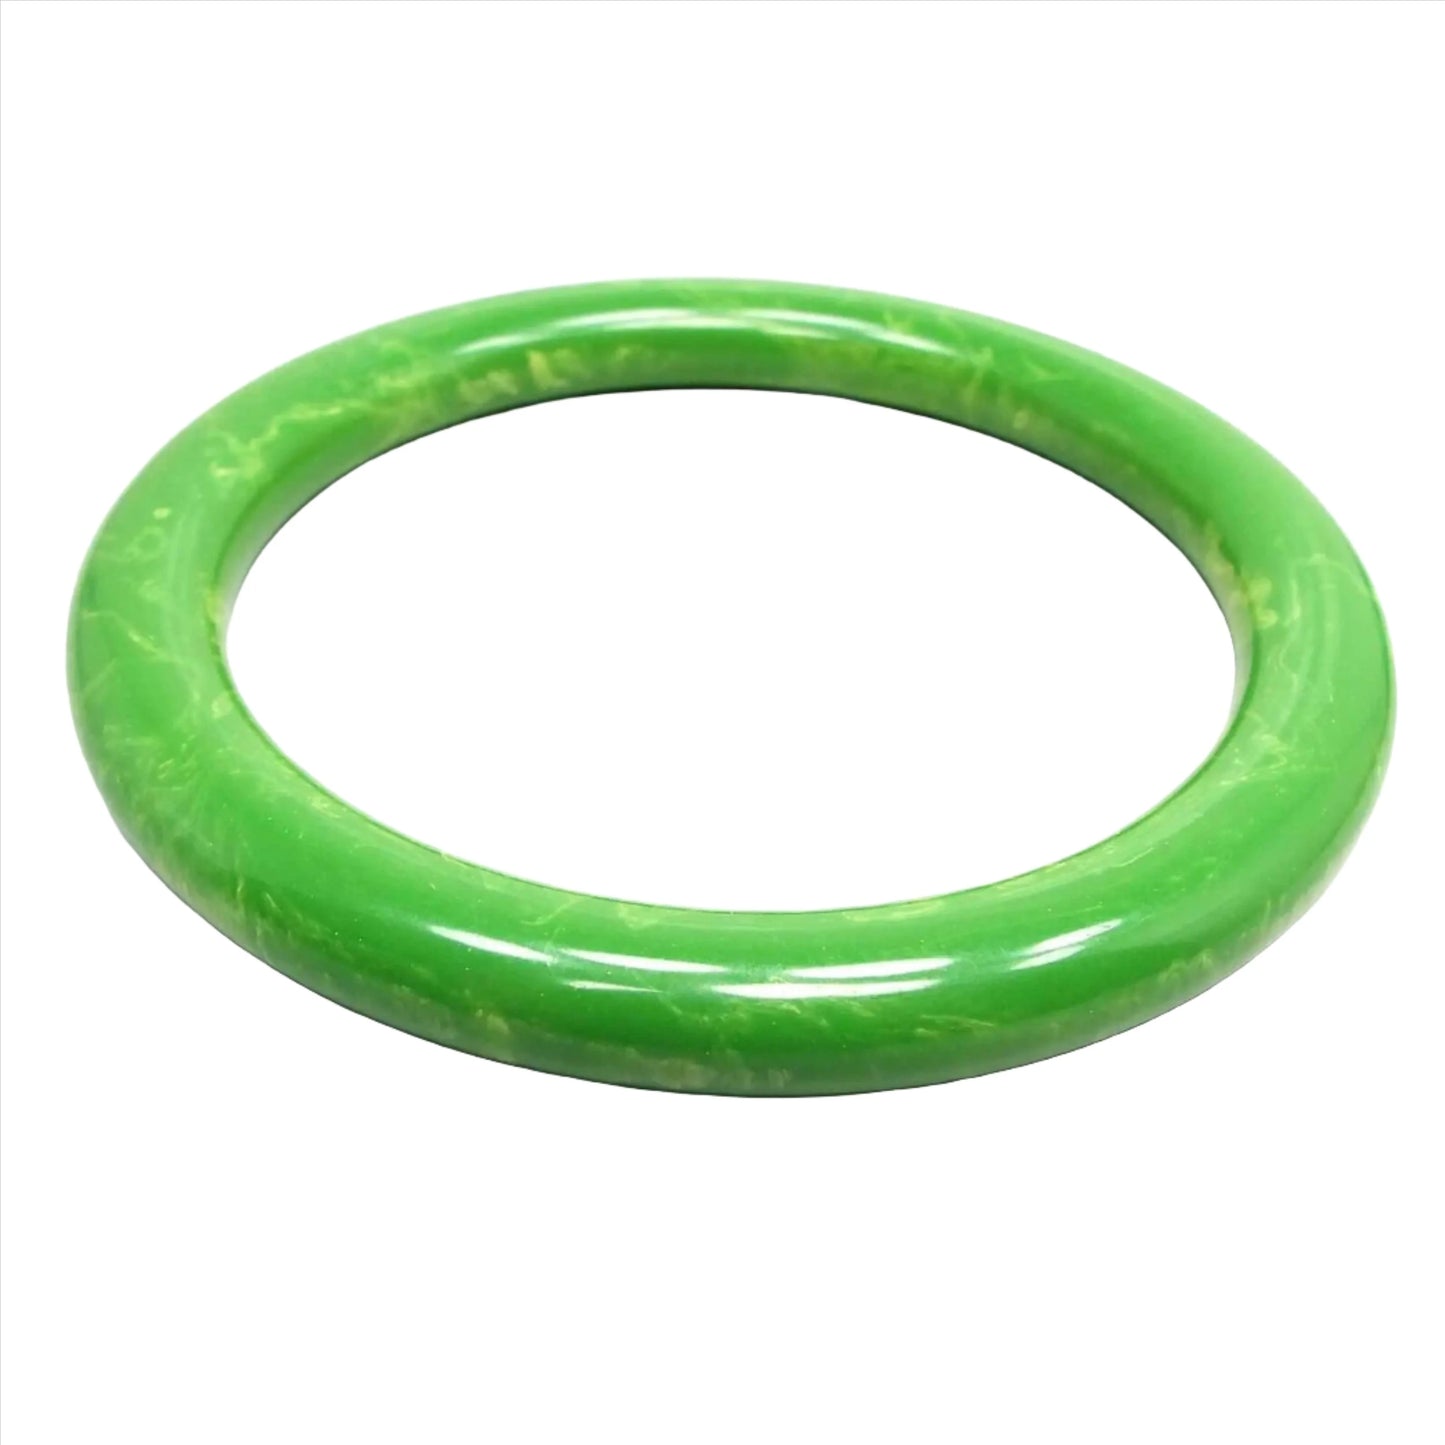 Angled top view of the 1960's vintage lucite bangle bracelet. The bangle is rounded and mostly green in color with some yellow marbled in here and there.